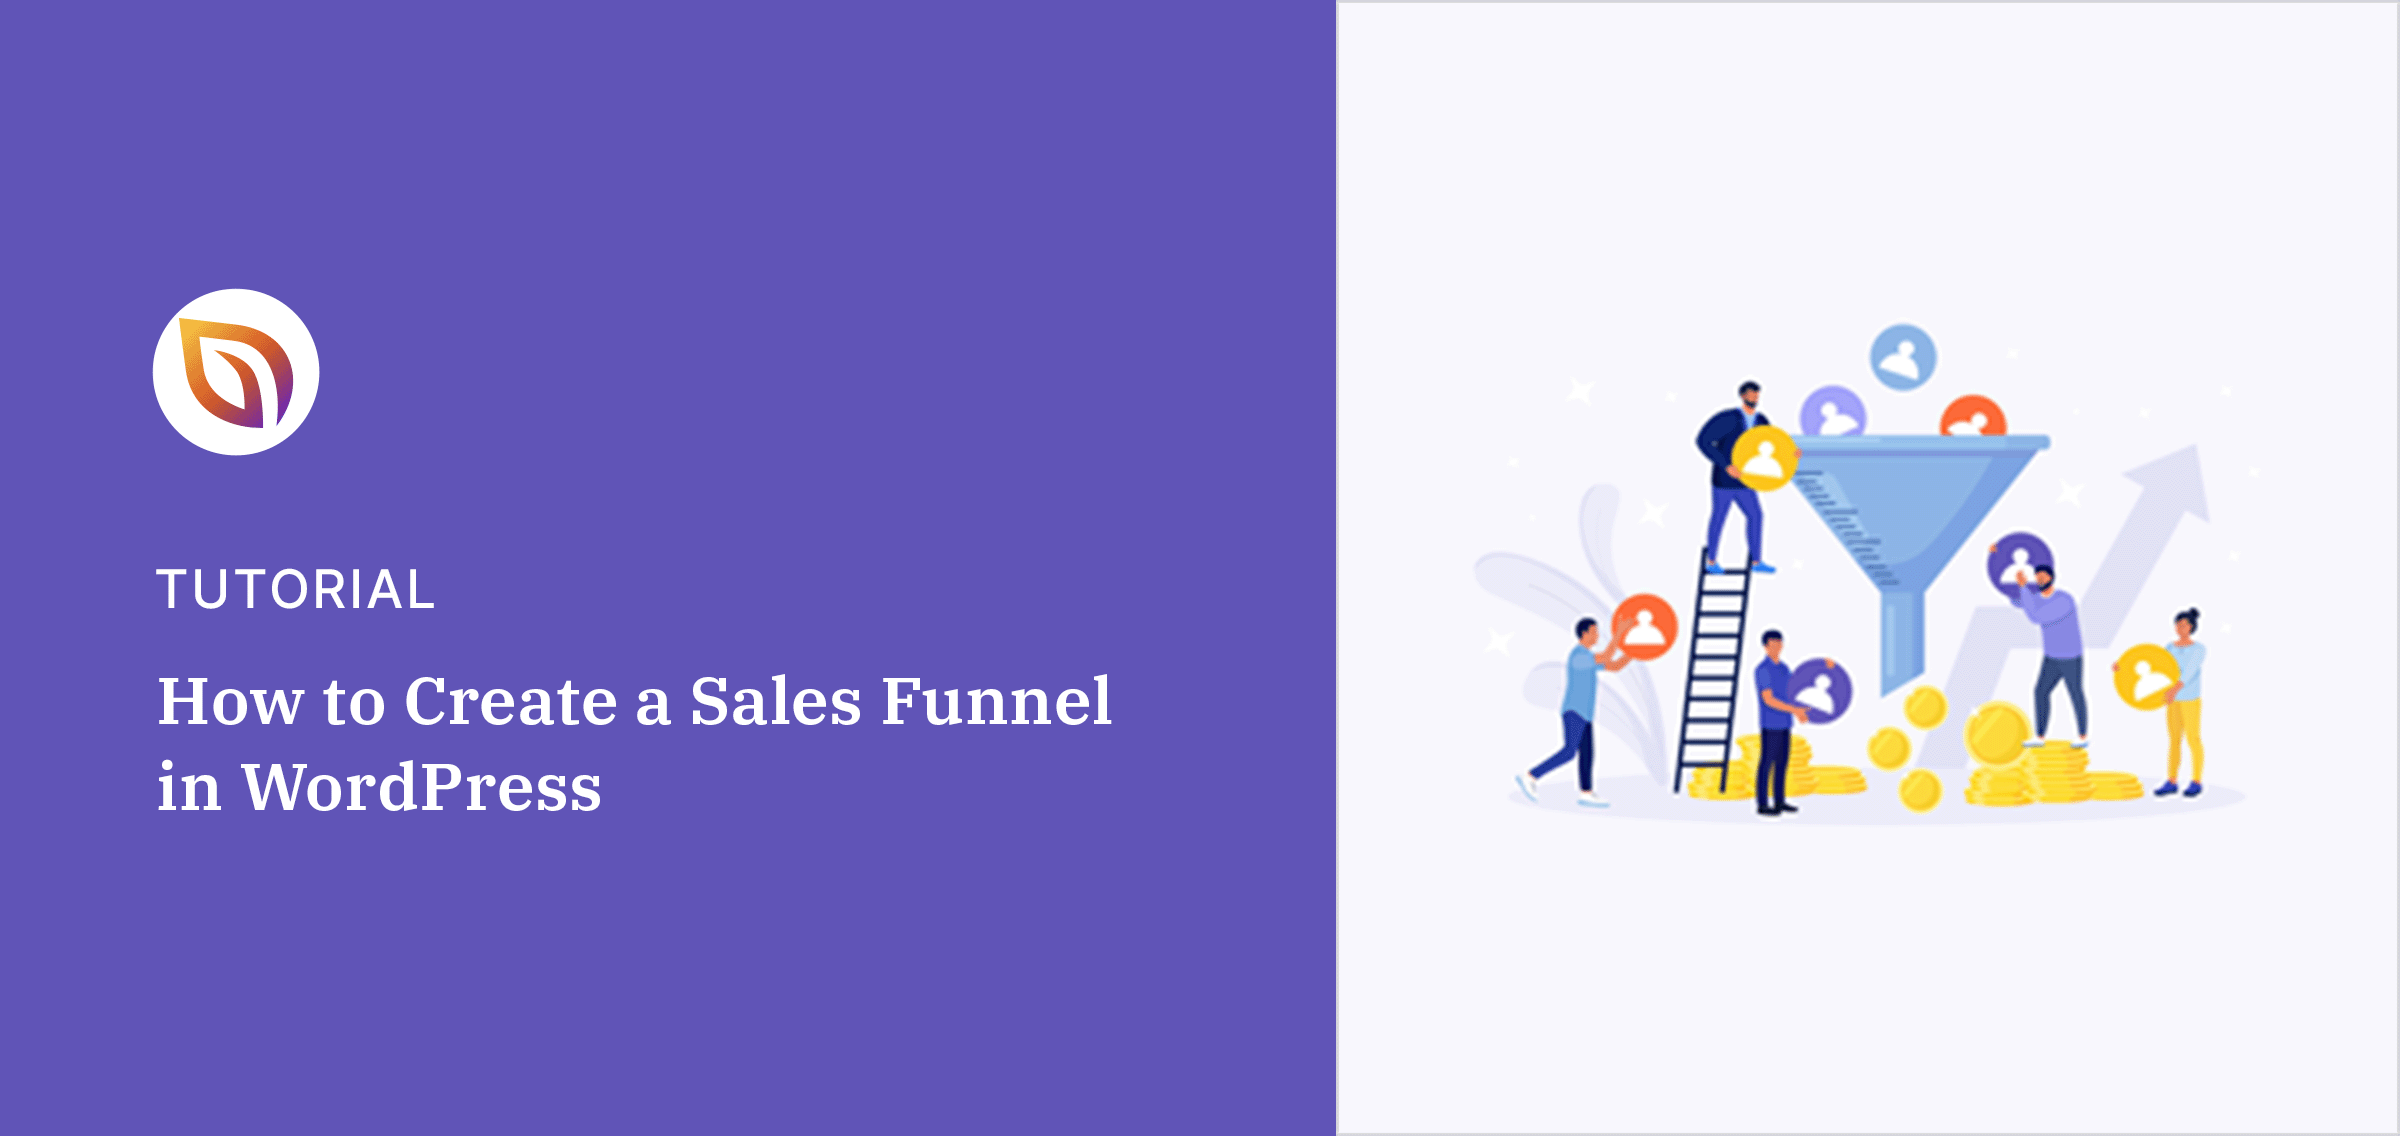 How to Create a Sales Funnel in WordPress